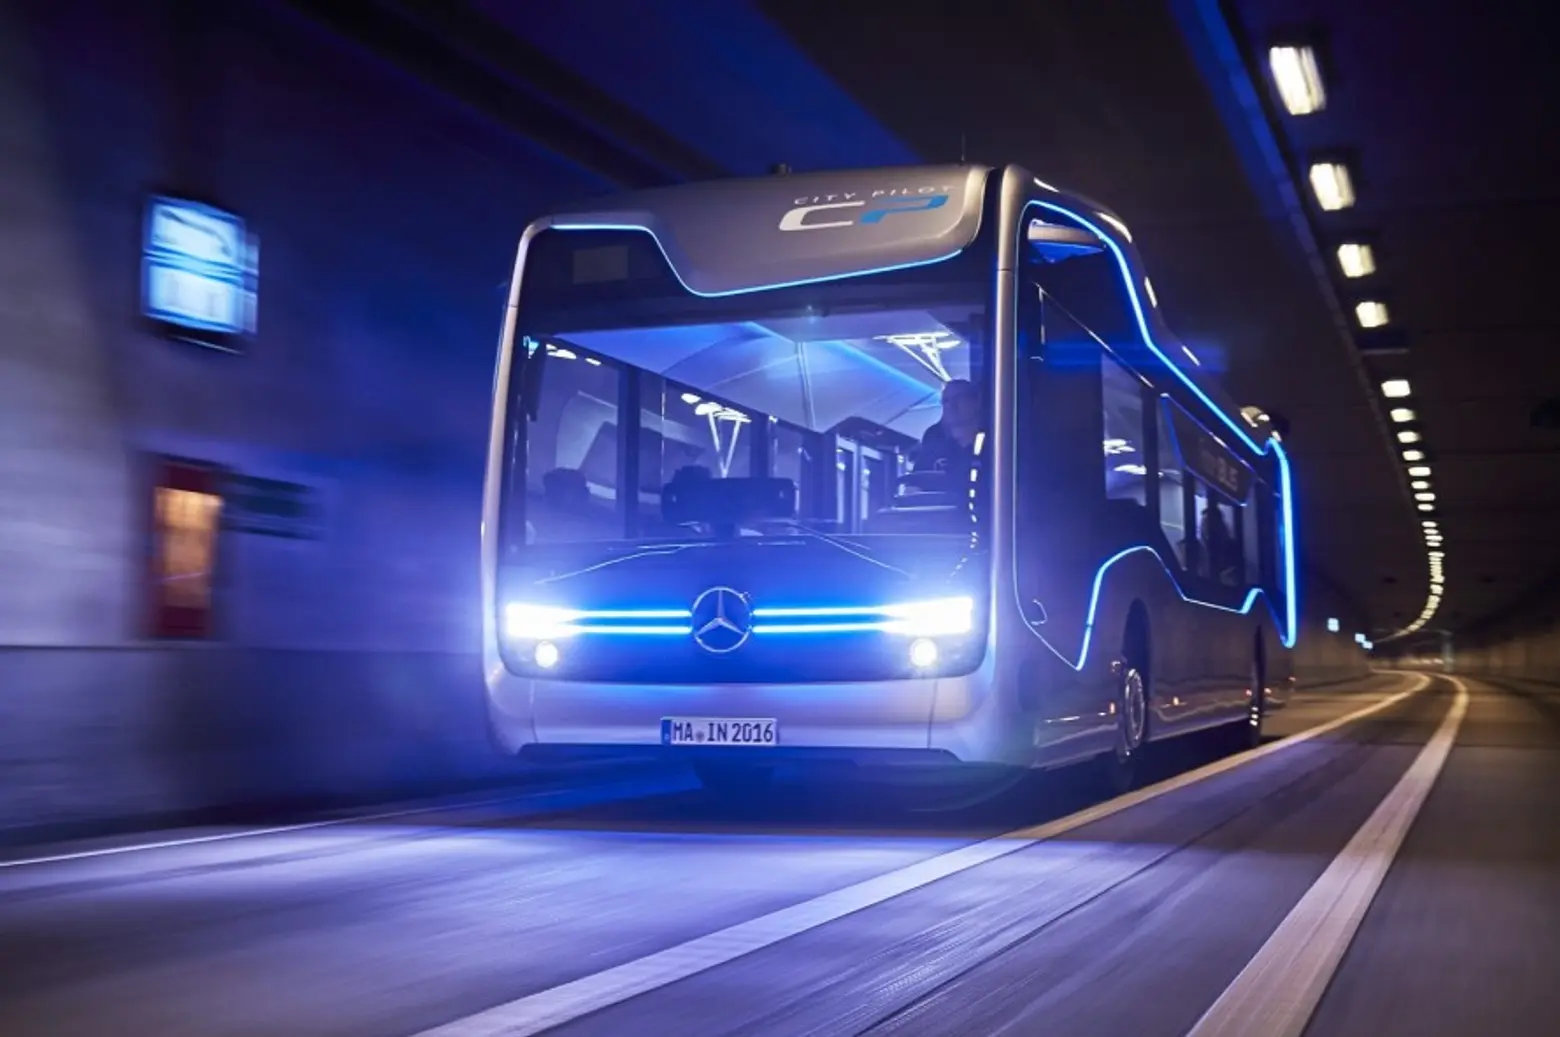 New Self-Driving Bus in Amsterdam Makes the MTA’s Transit Plan Look Dated